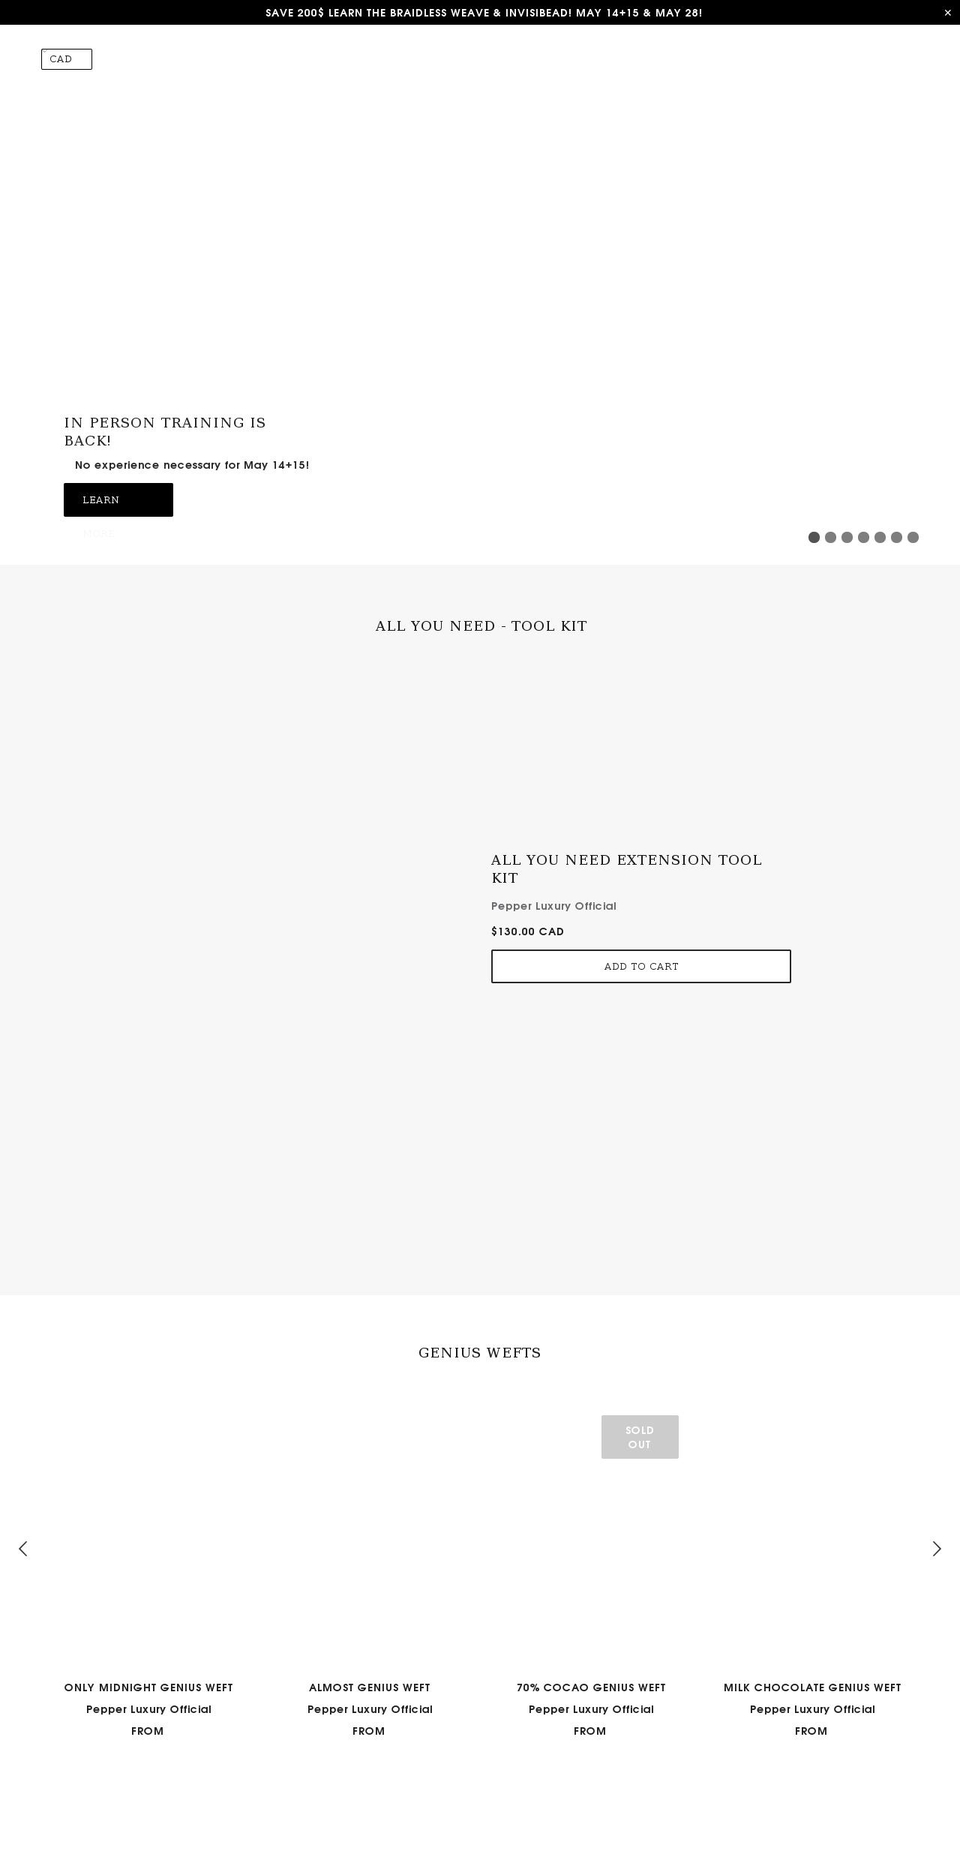 LUXURY Shopify theme site example pepperluxuryofficial.com